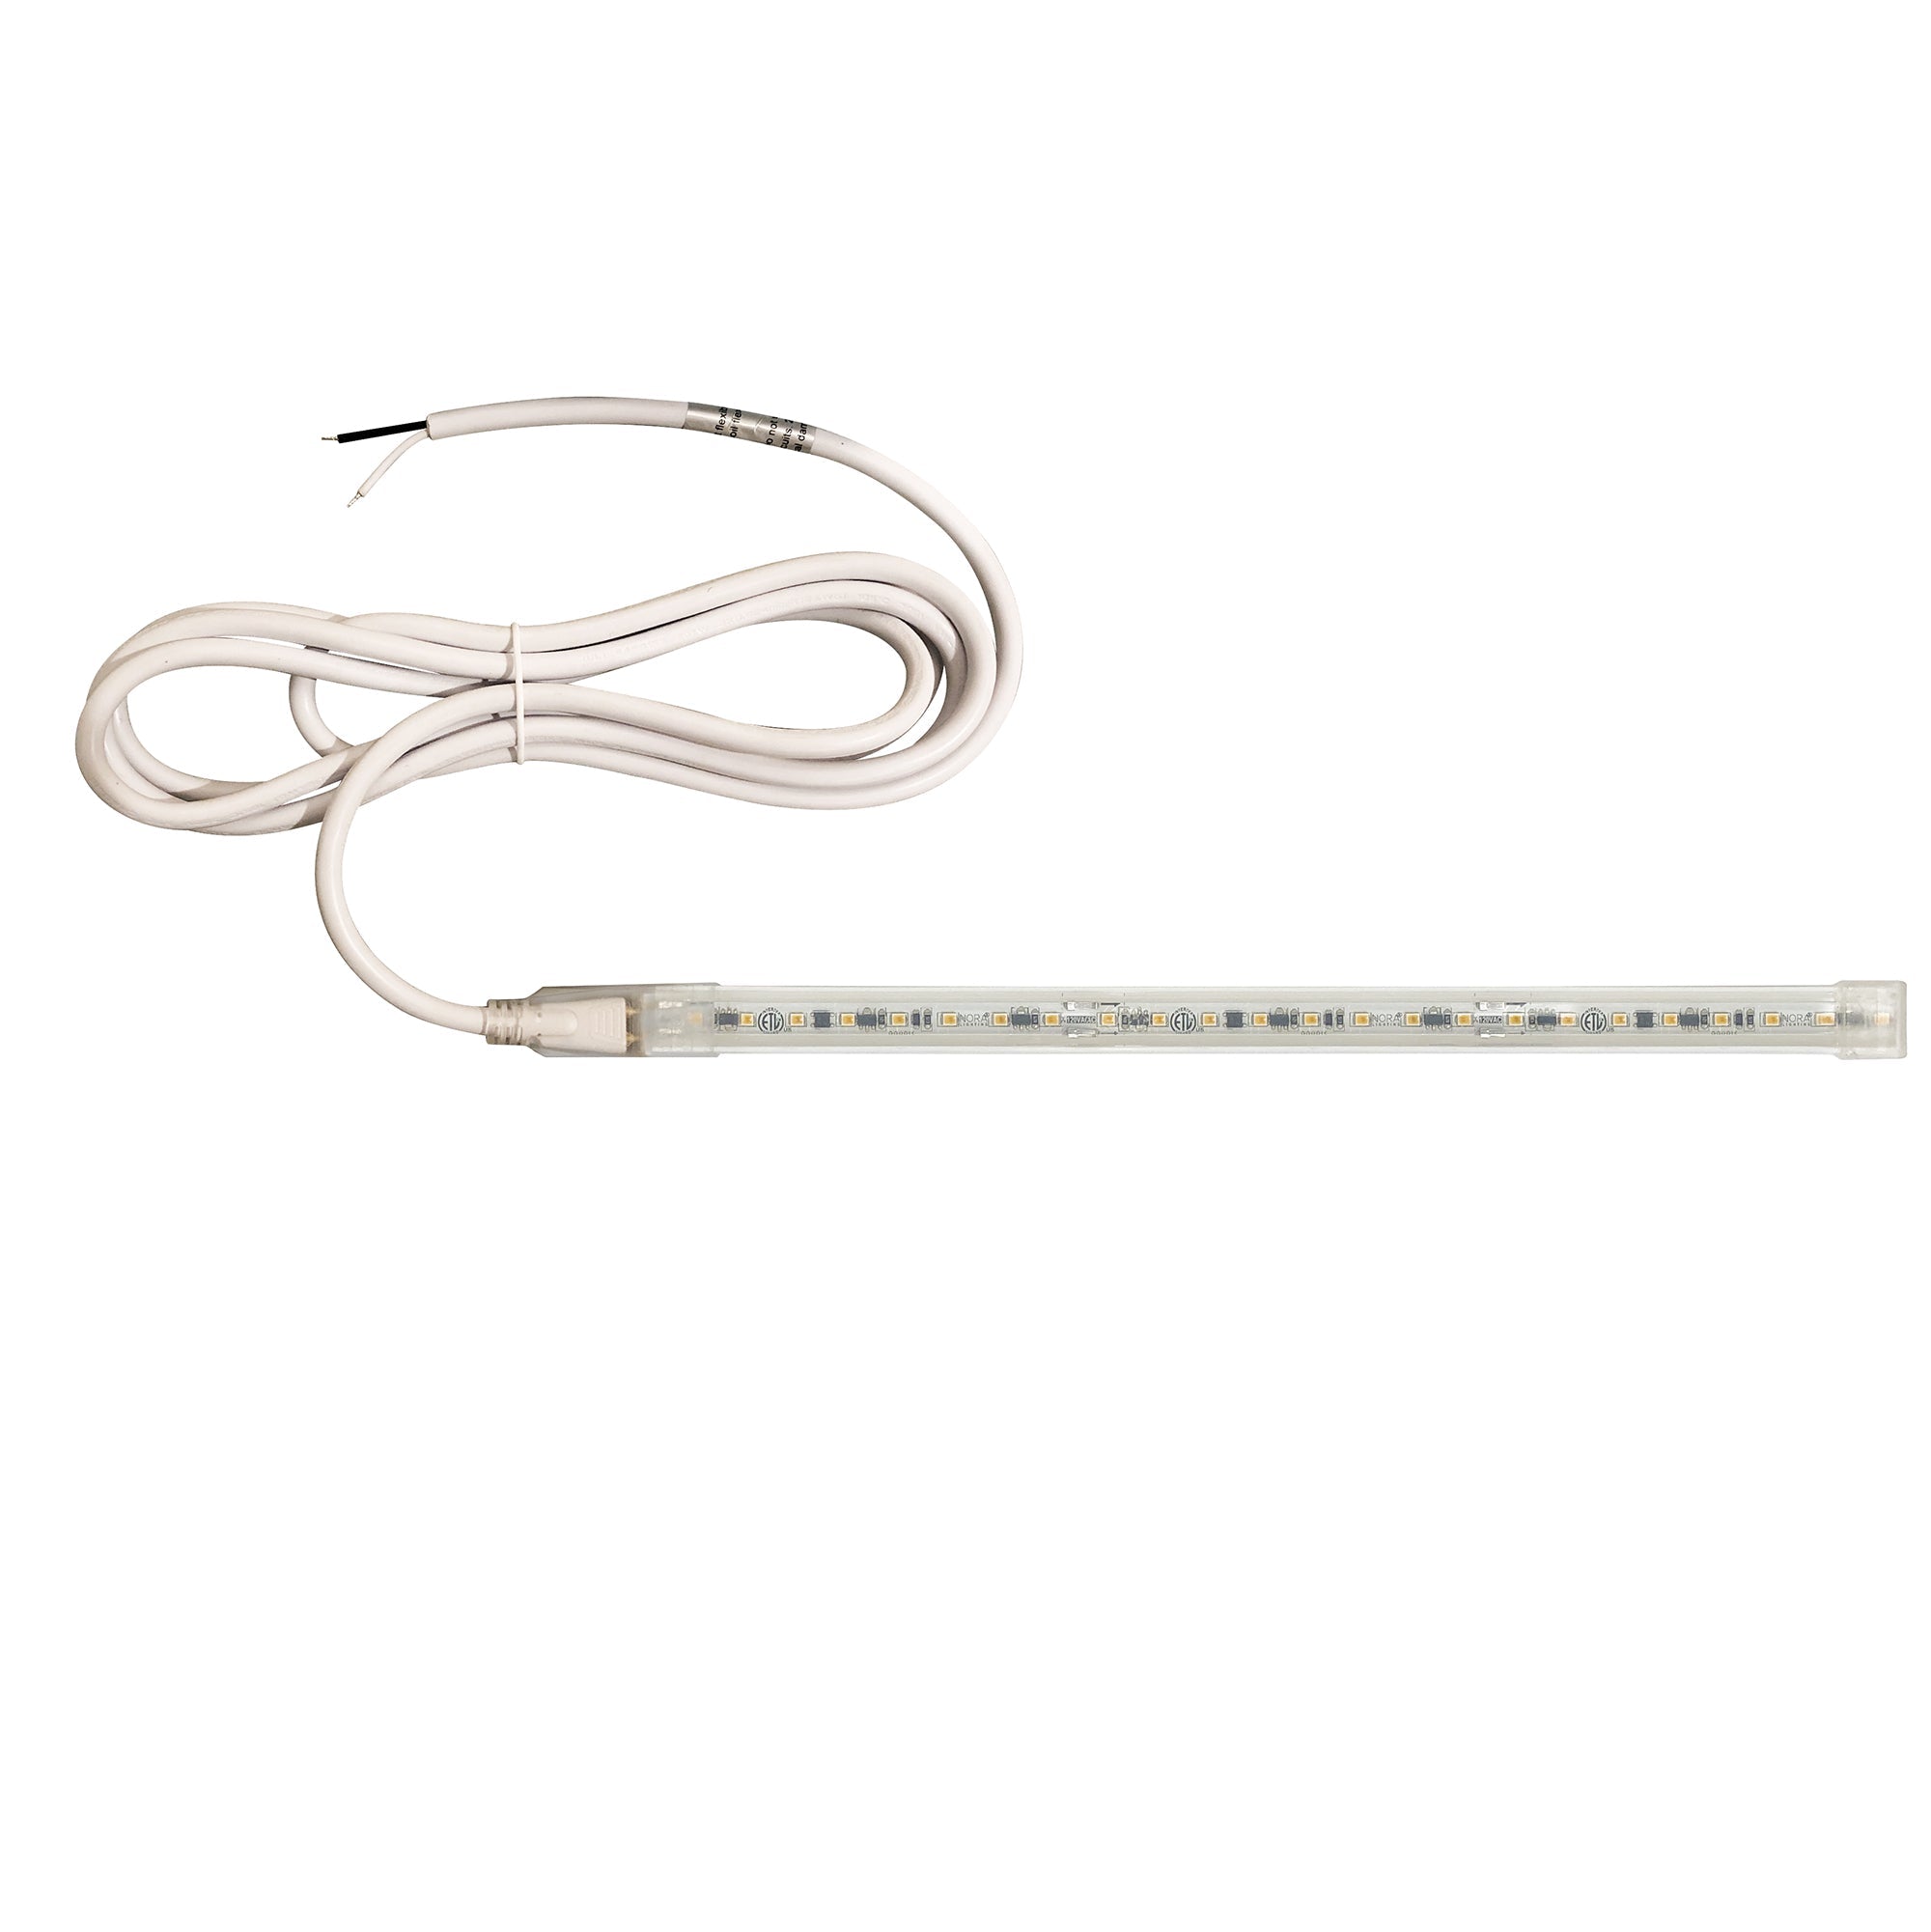 Nora Lighting NUTP13-W9-4-12-930/HW - Accent / Undercabinet - Custom Cut 9-ft, 4-in 120V Continuous LED Tape Light, 330lm / 3.6W per foot, 3000K, w/ Mounting Clips and 8' Hardwired Power Cord